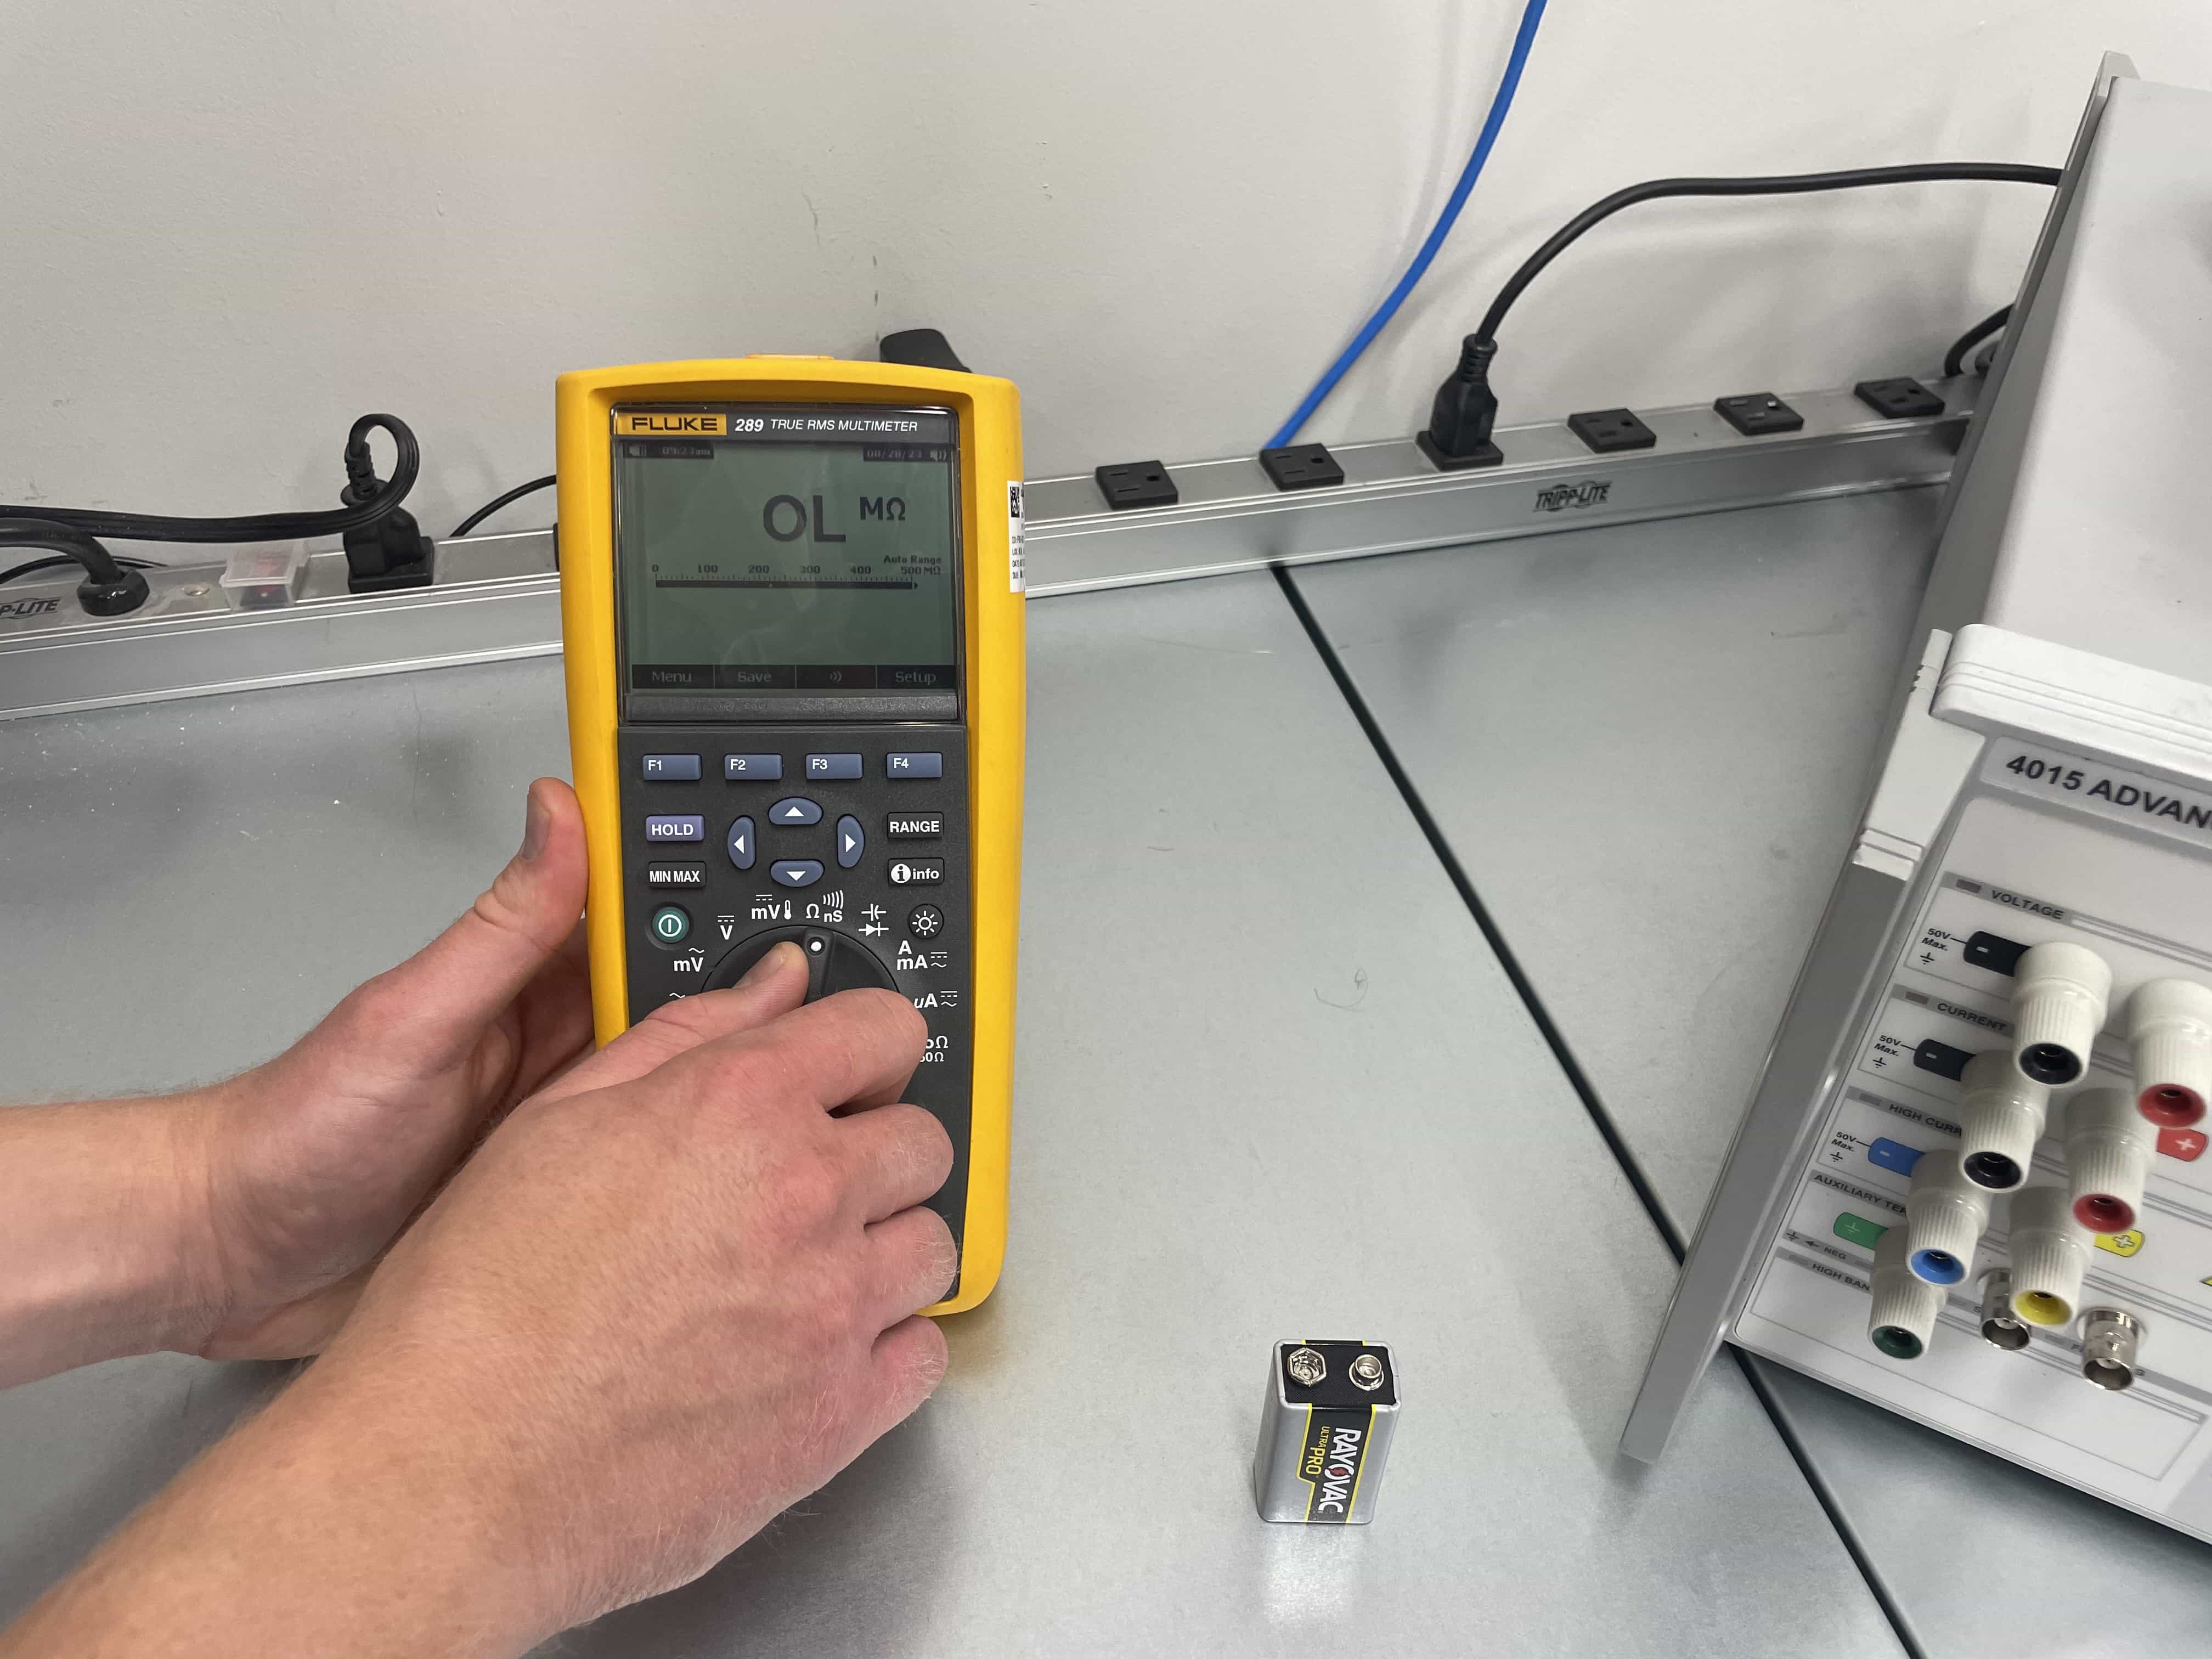 How to Use a Multimeter - Select Appropriate Measurement Mode